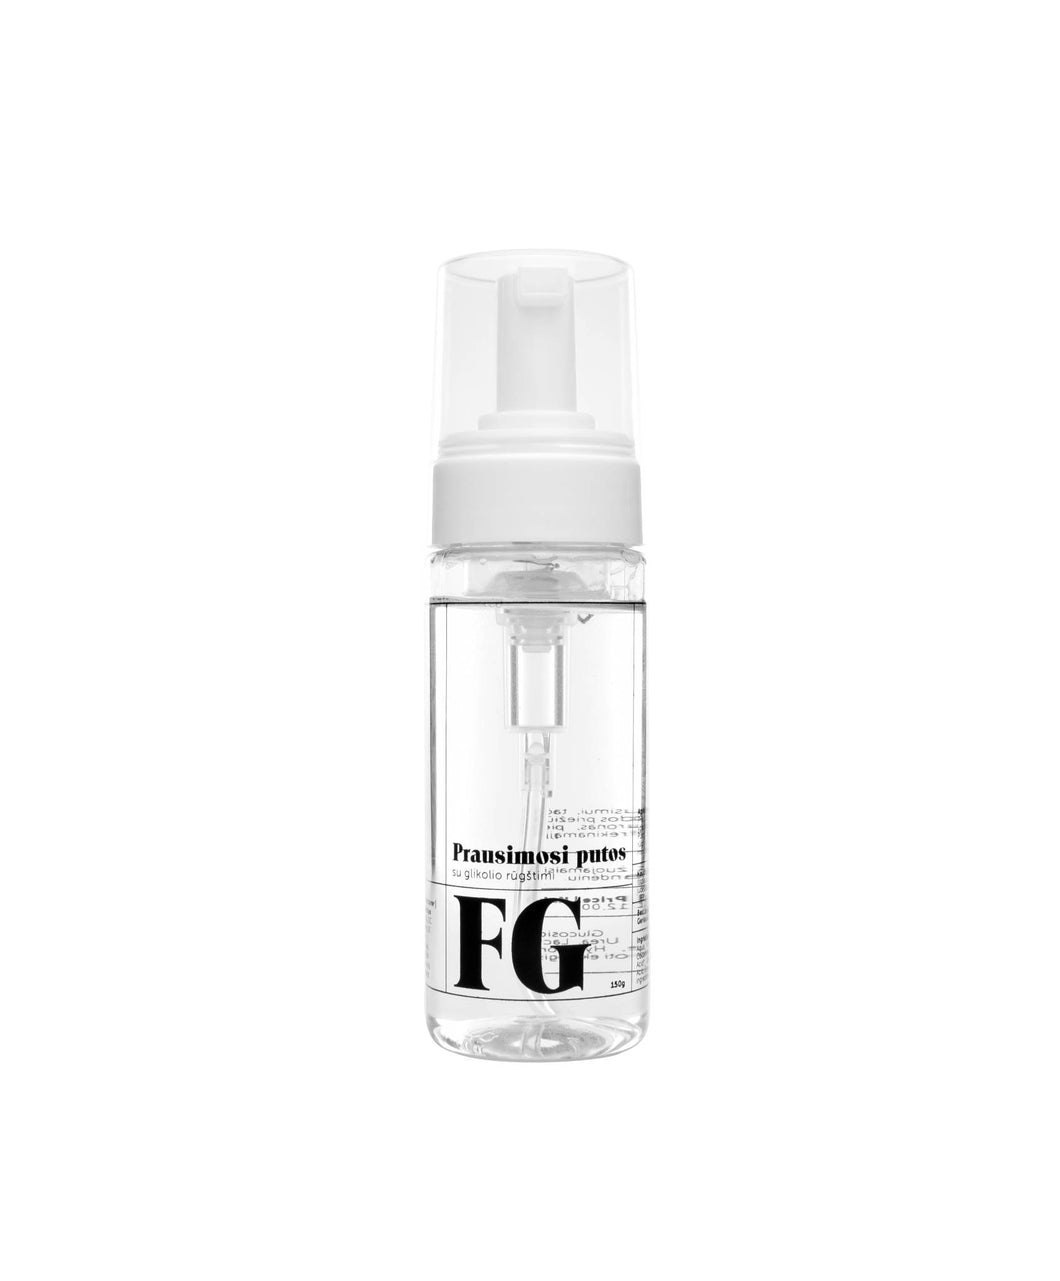 Foaming cleanser with glycolic acid, 150g - hydrating and gentle effect